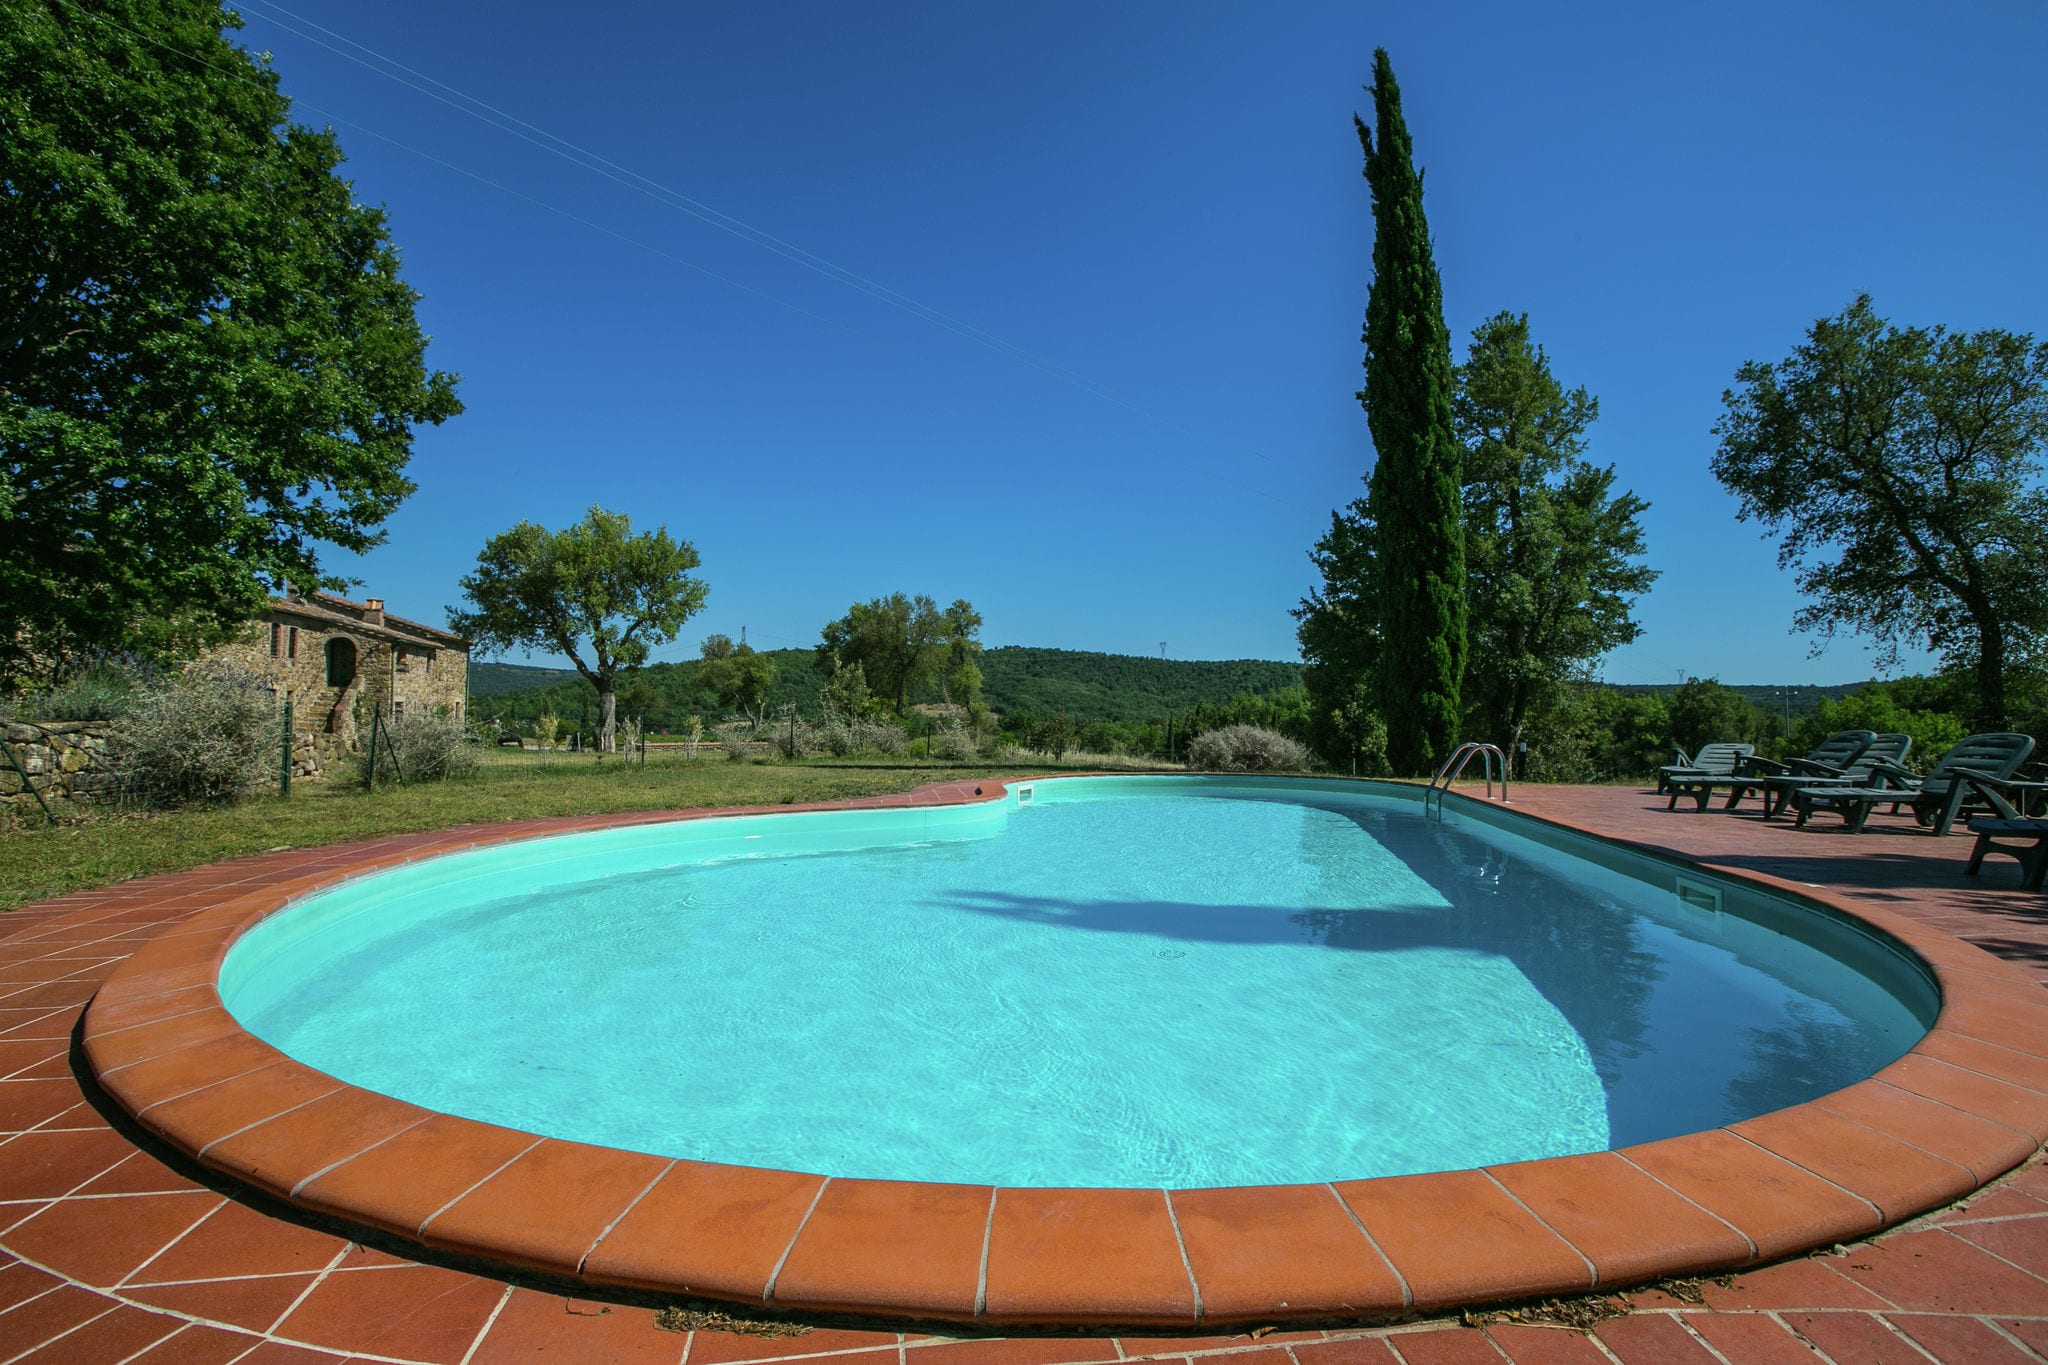 Apartment in a rustic house in the Tuscan hills, 20 minutes from the sea